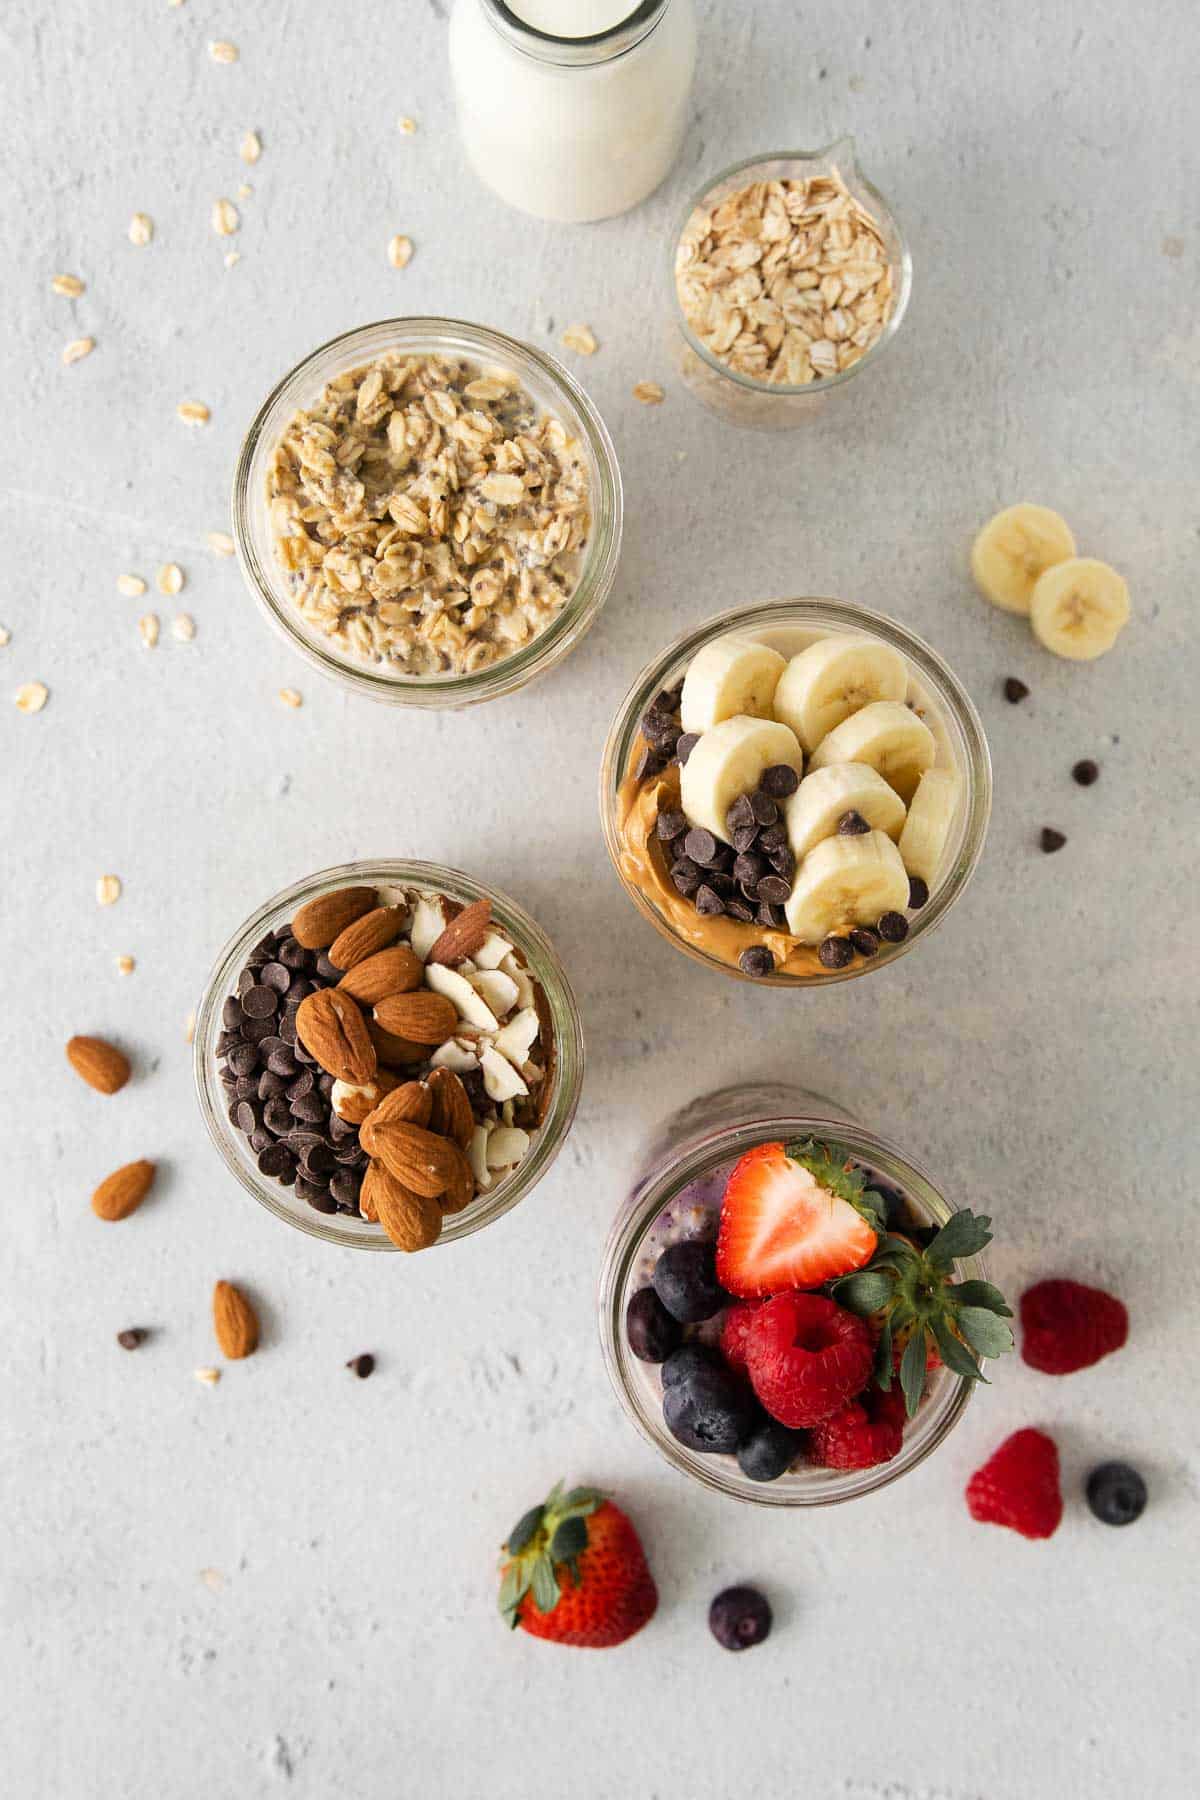 An overhead view of gluten-free overnight oats in jars